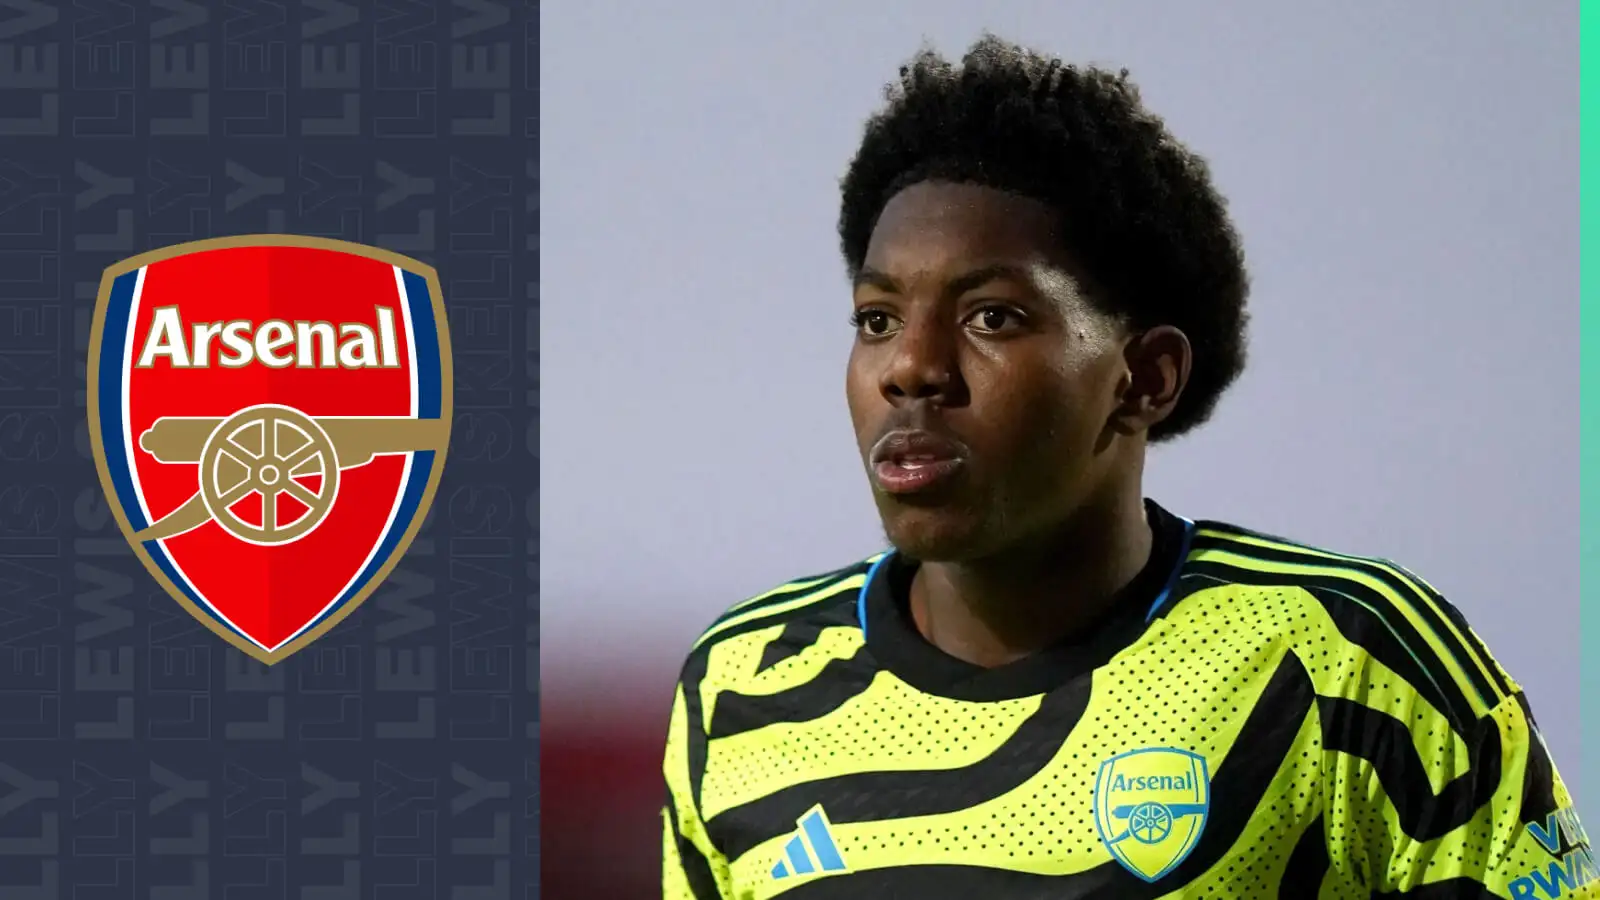 Myles Lewis-Skelly has signed his first professional deal with Arsenal.